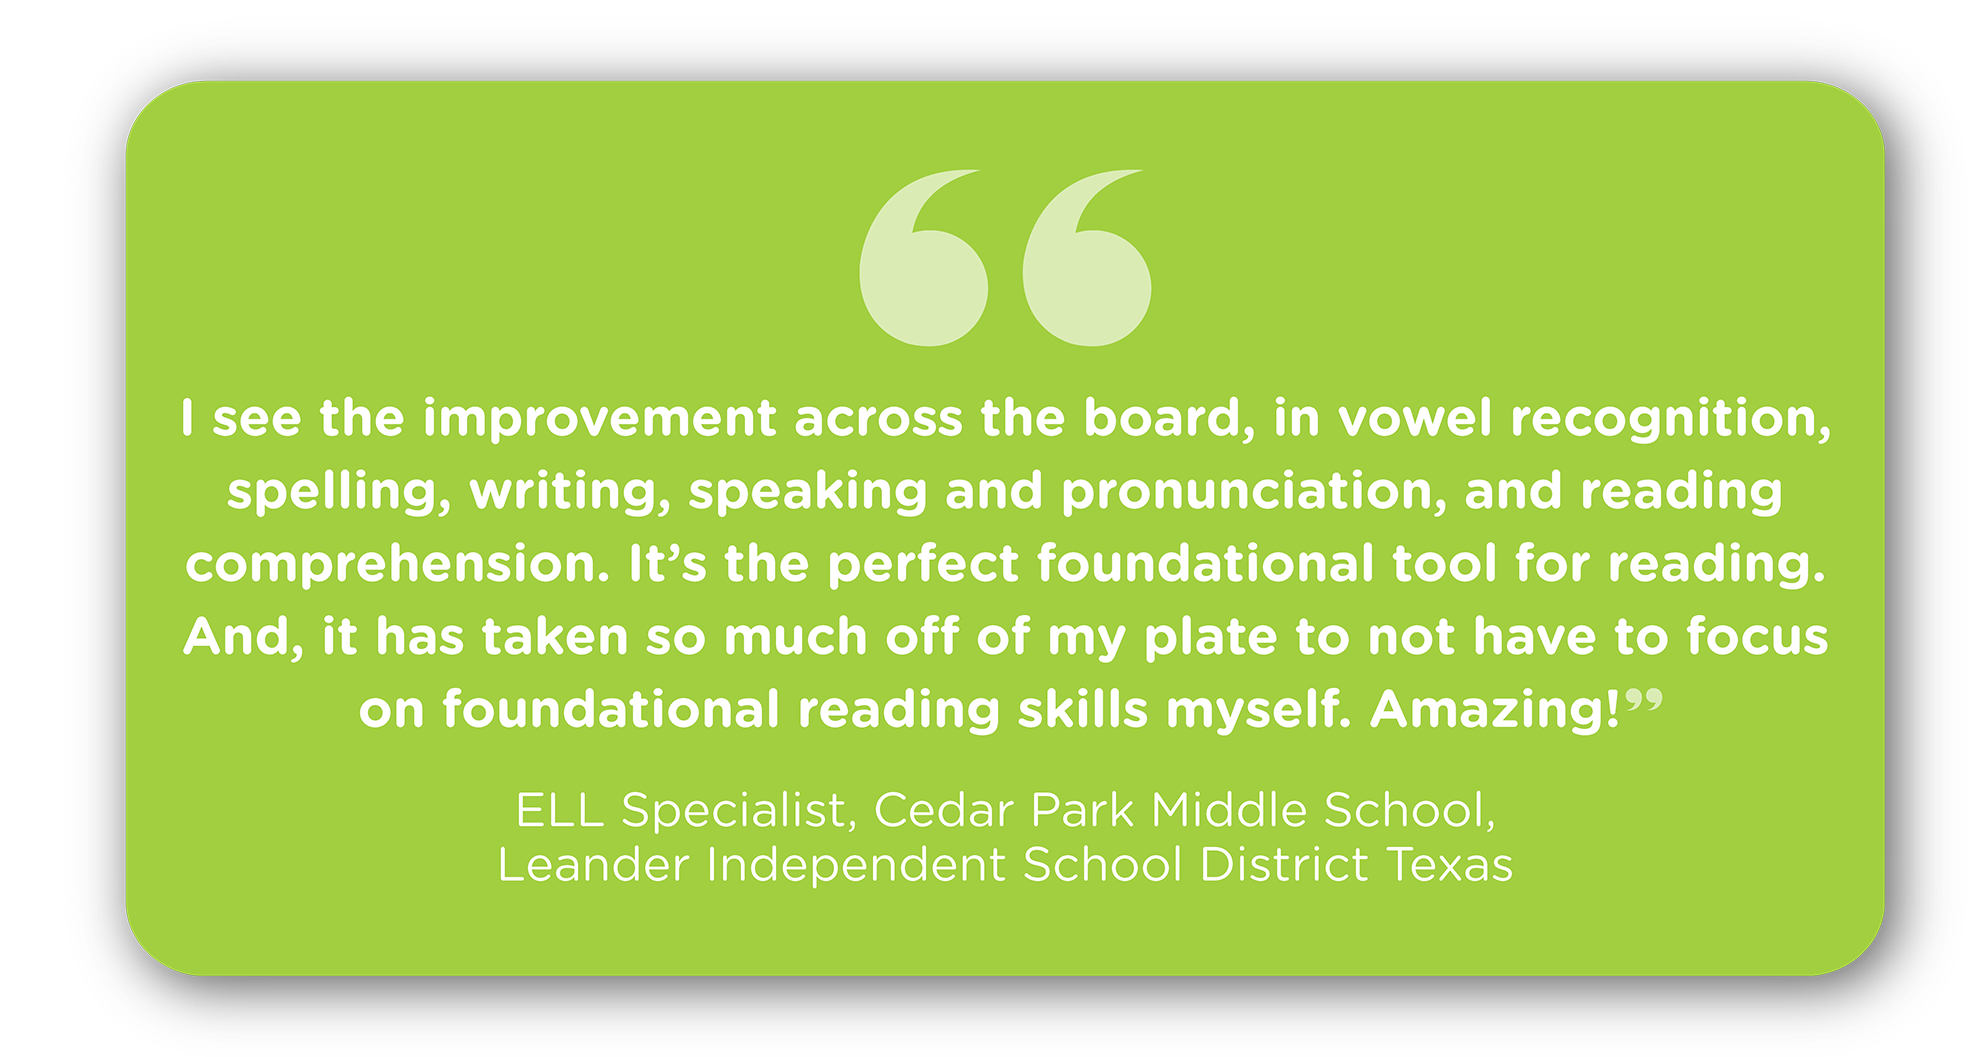 “I see the improvement across the board, in vowel recognition, spelling, writing, speaking and pronunciation, and reading comprehension. It’s the perfect foundational tool for reading. And, it has taken so much off of my plate to not have to focus on foundational reading skills myself. Amazing!” Robby Lynd ELL Specialist, Cedar Park Middle School, Leander Independent School District Texas